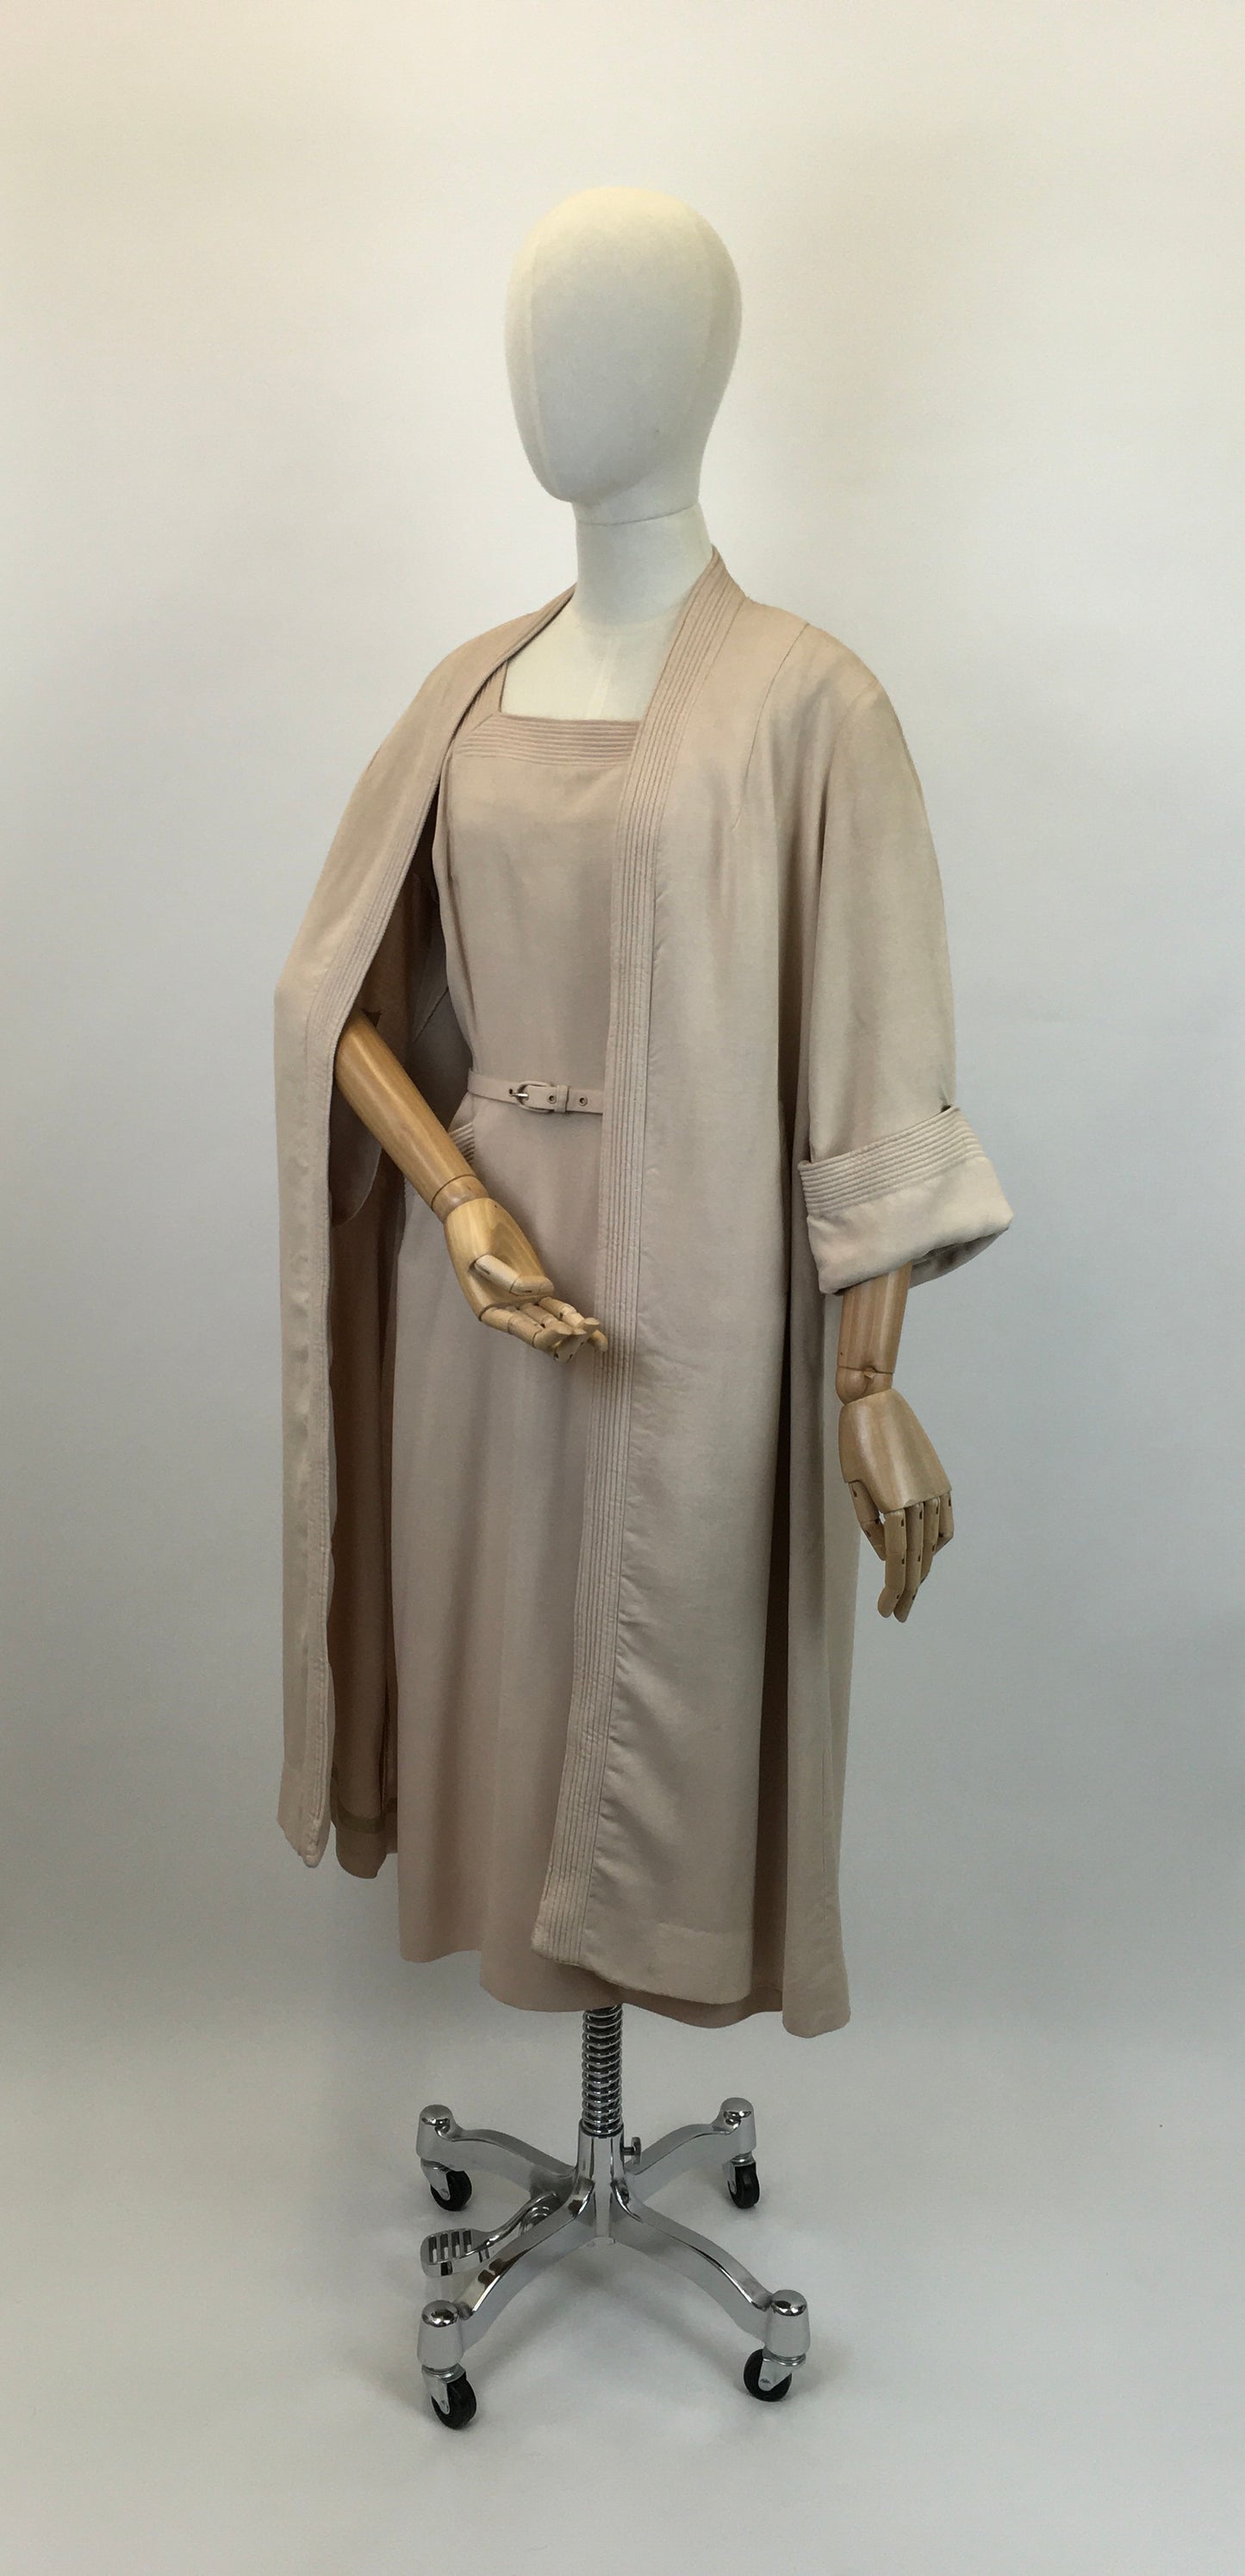 Original 1950’s Stunning ‘ Peggy Page’ Dress and Coat set - In Soft Sand Moygoshal Linen